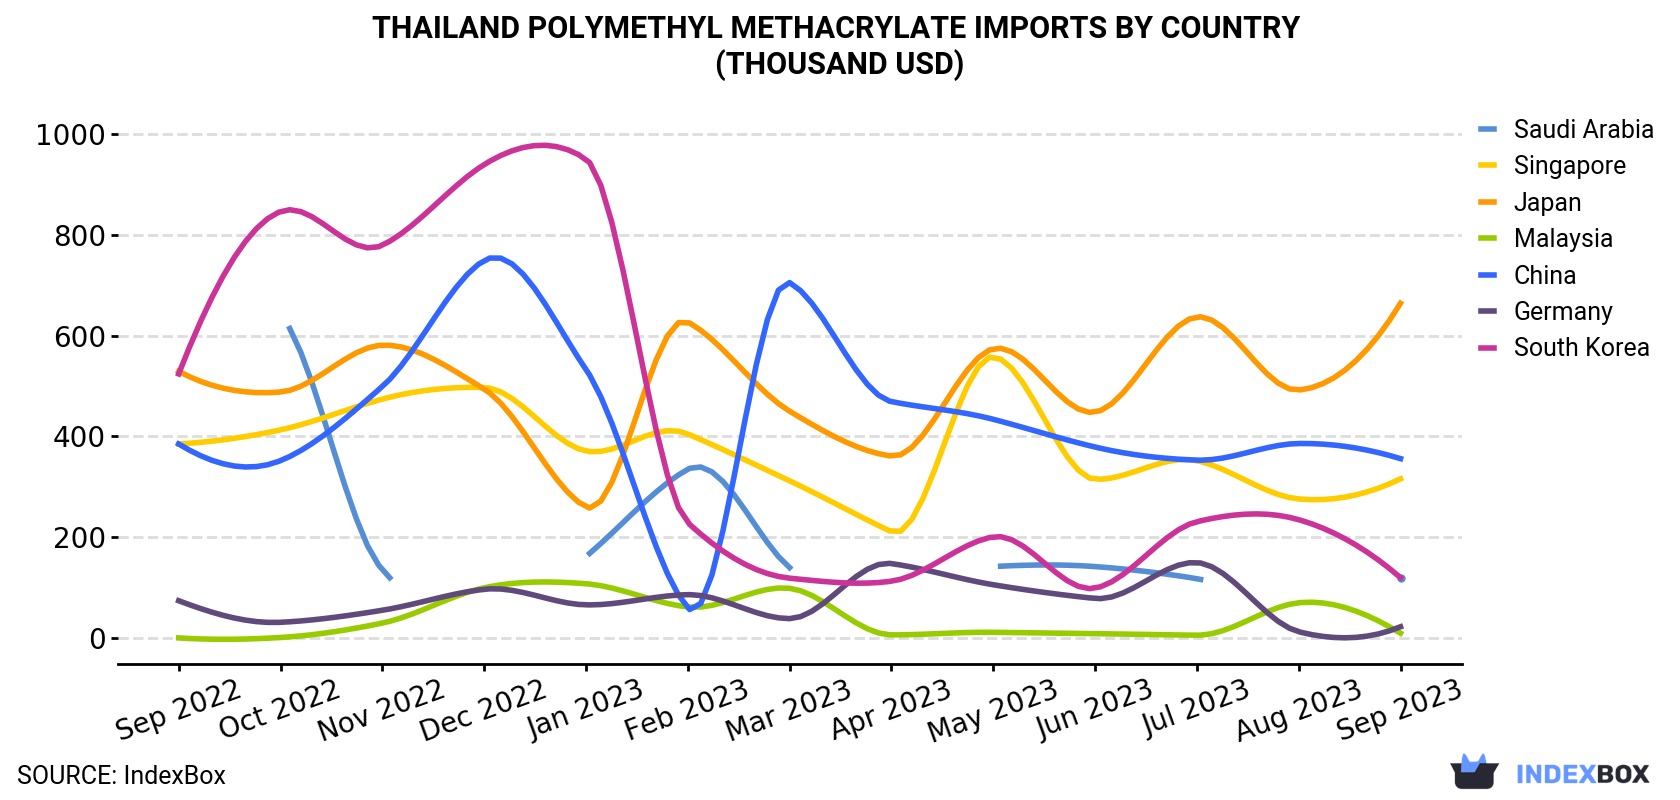 Thailand Polymethyl Methacrylate Imports By Country (Thousand USD)